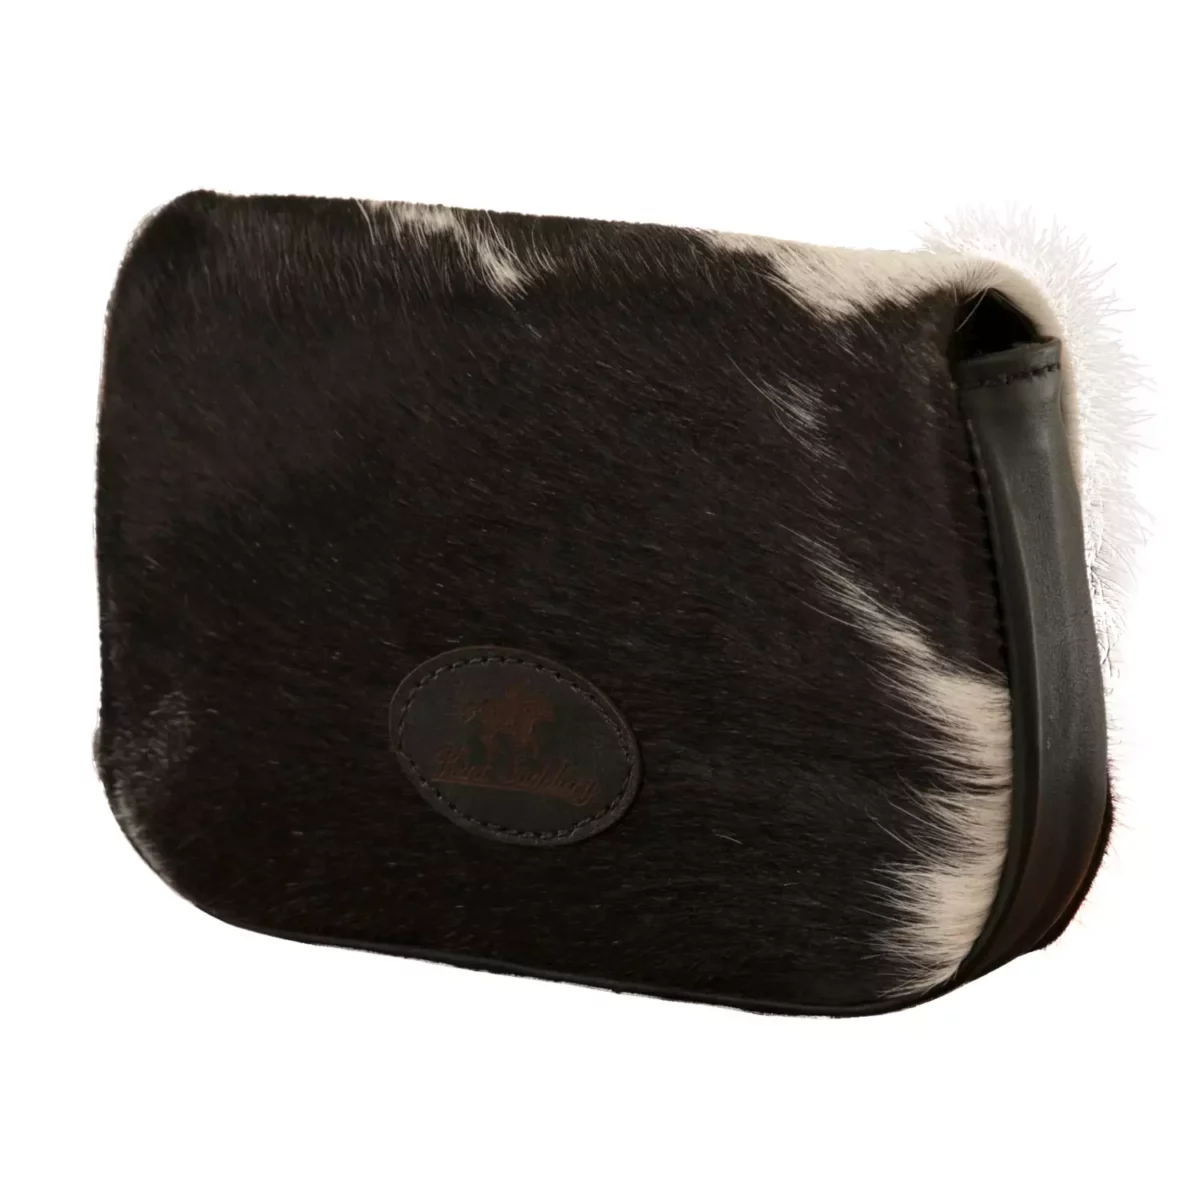 Purse, Heritage, Clutch, Hair-on Cow Hide and Kangaroo leather 2